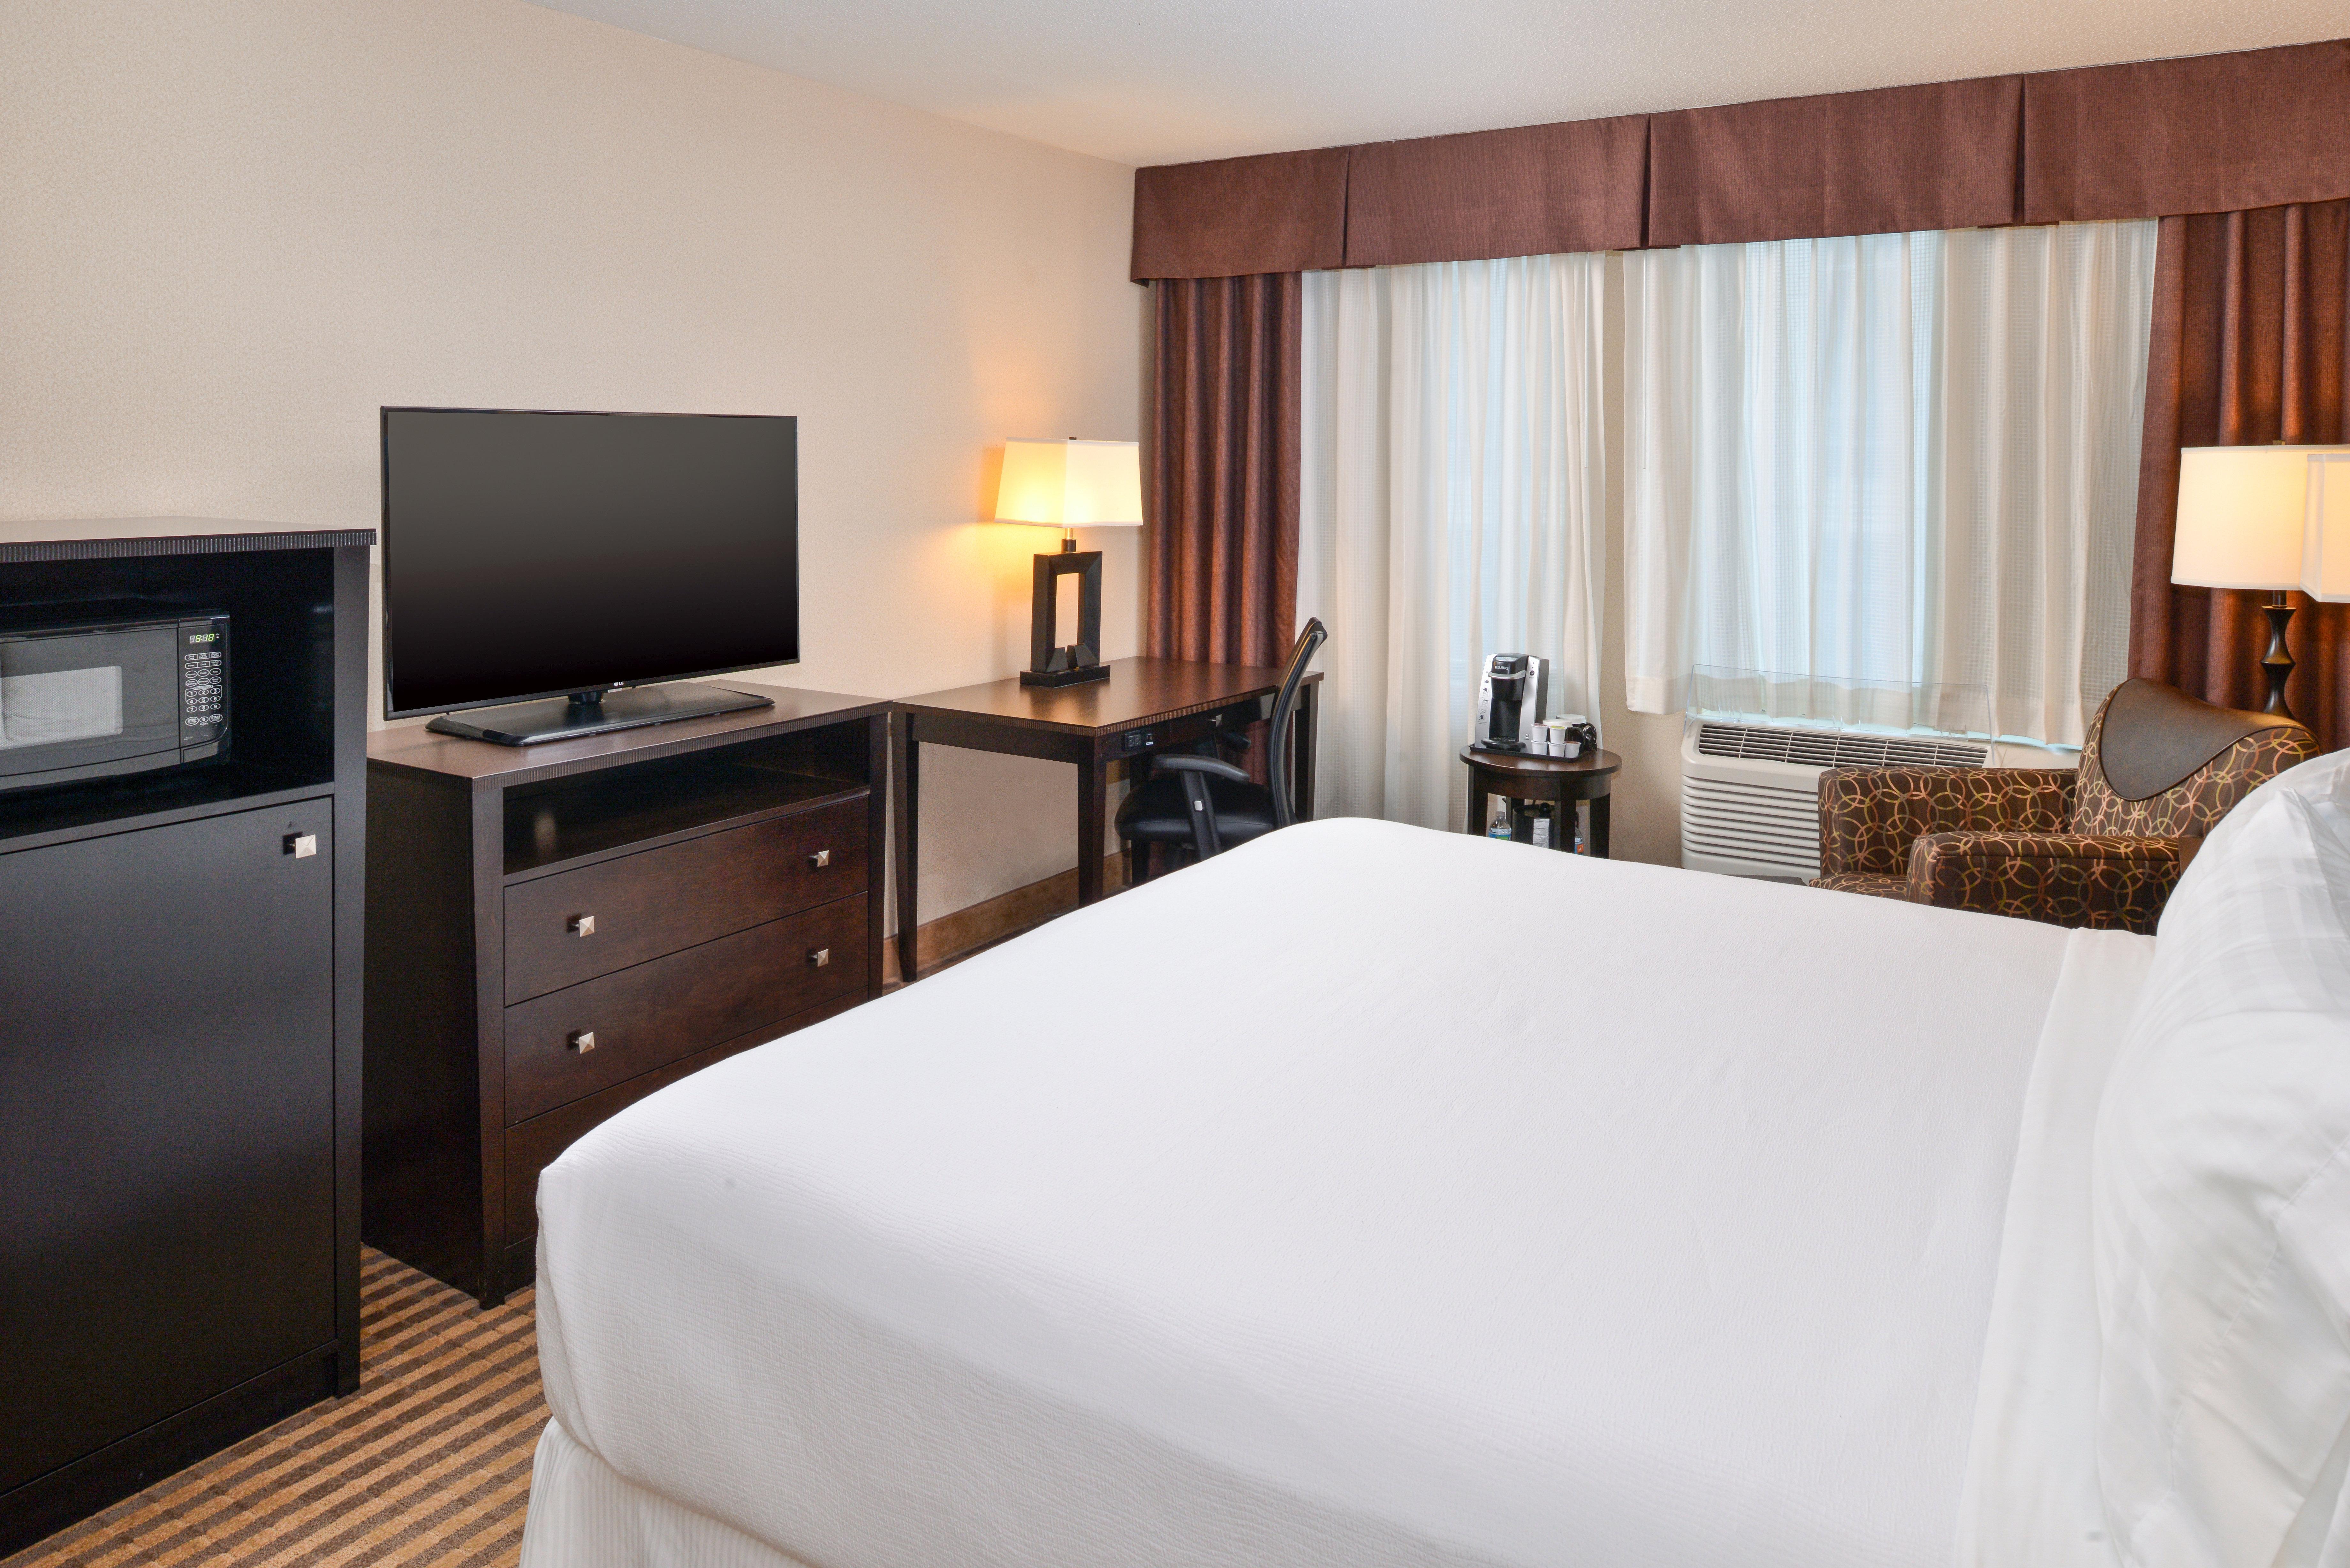 Downtown Charlotte Attractions - Holiday Inn Center City